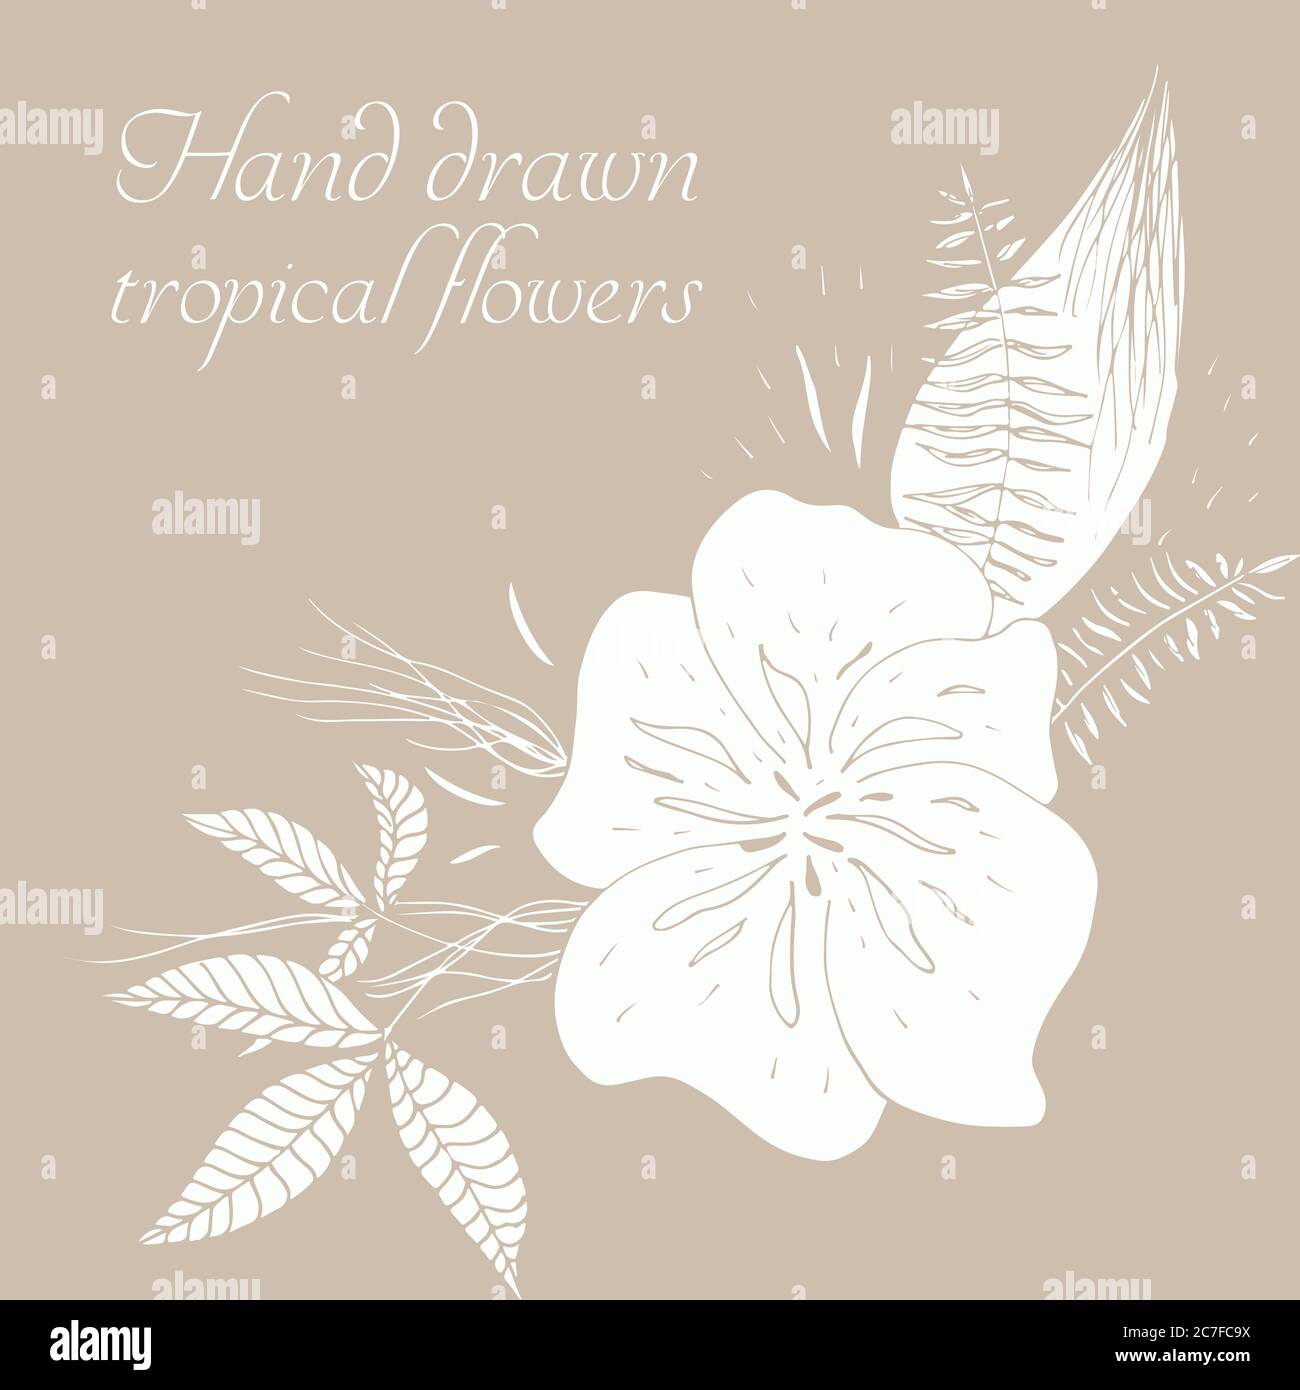 Vector composition of hand drawn tropical flowers, palm leaves, jungle plants, paradise bouquet. Floral illustration in sketch style. Summer backgroun Stock Vector